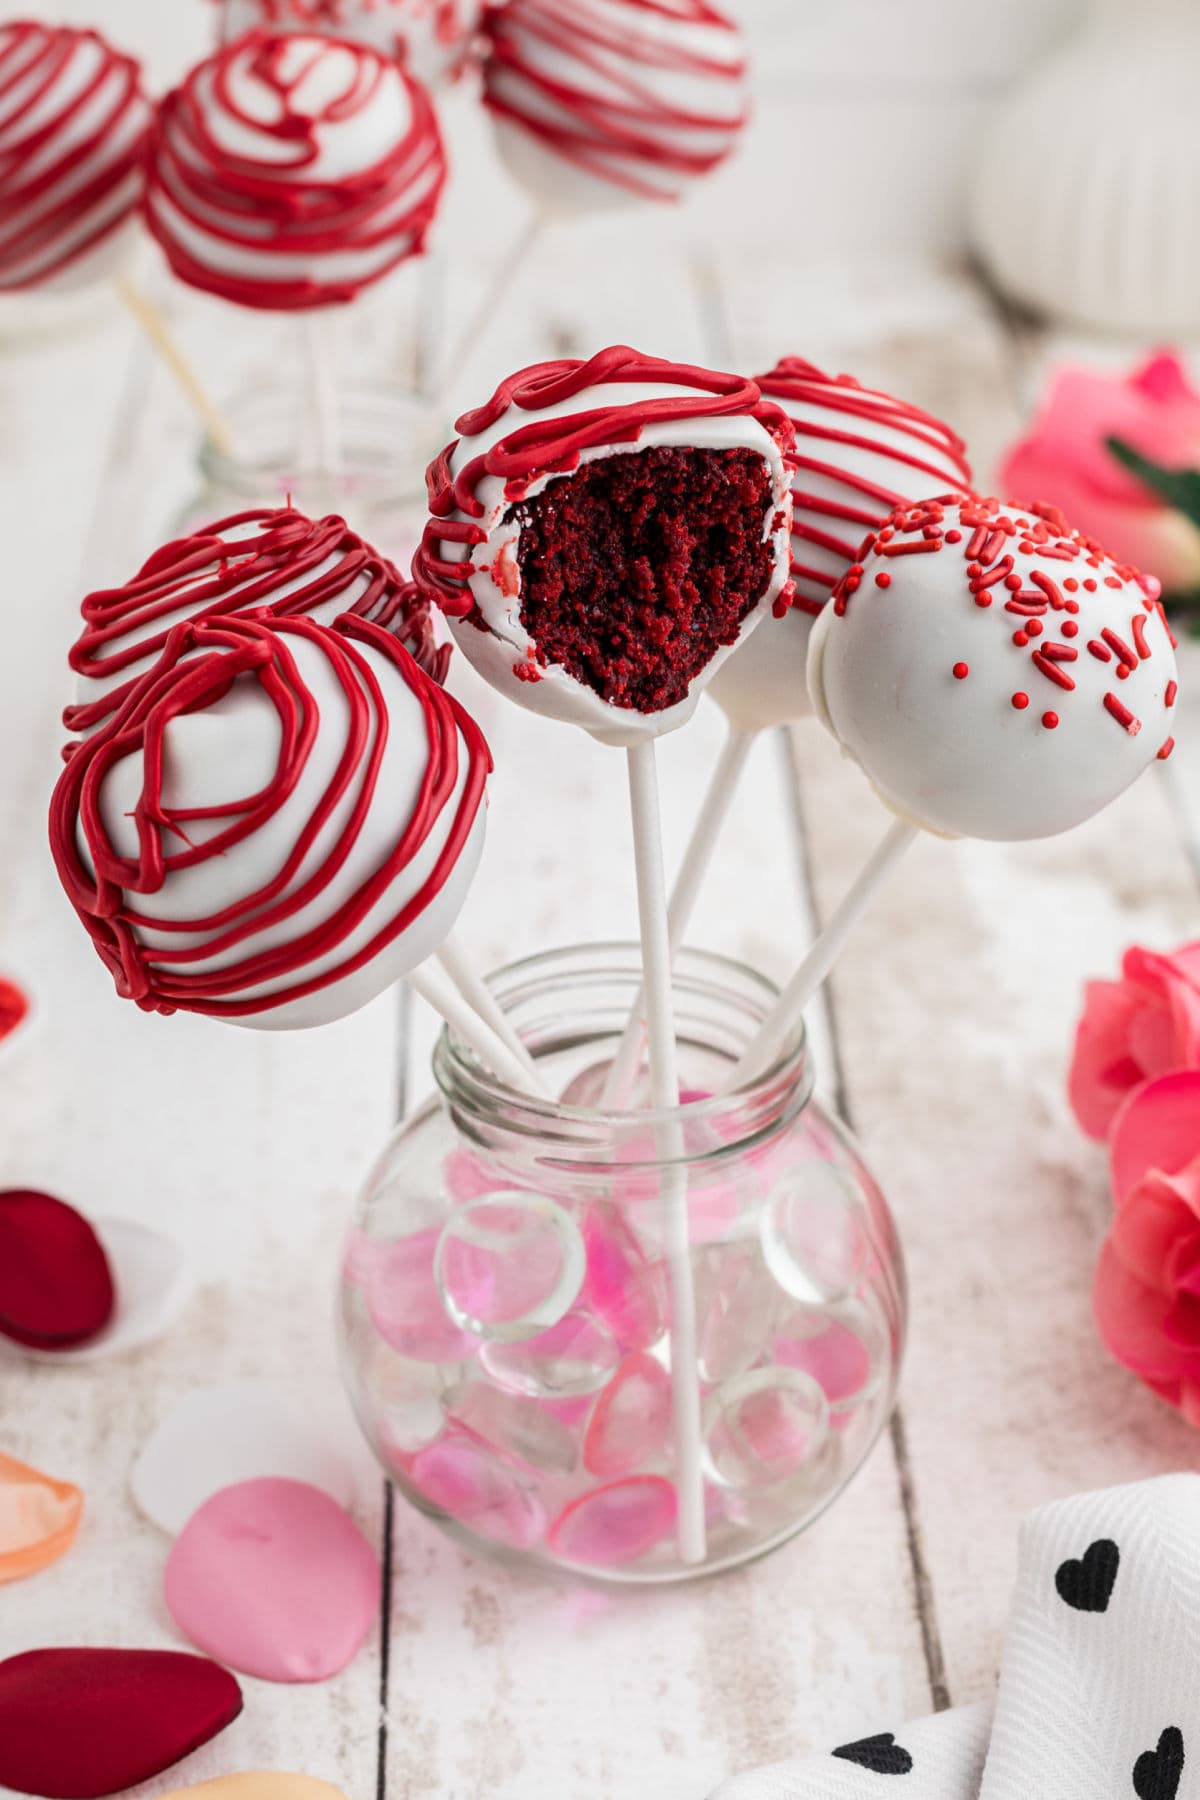 A group of cake pops in a jar with one opened up so you can see the red velvet cake inside.